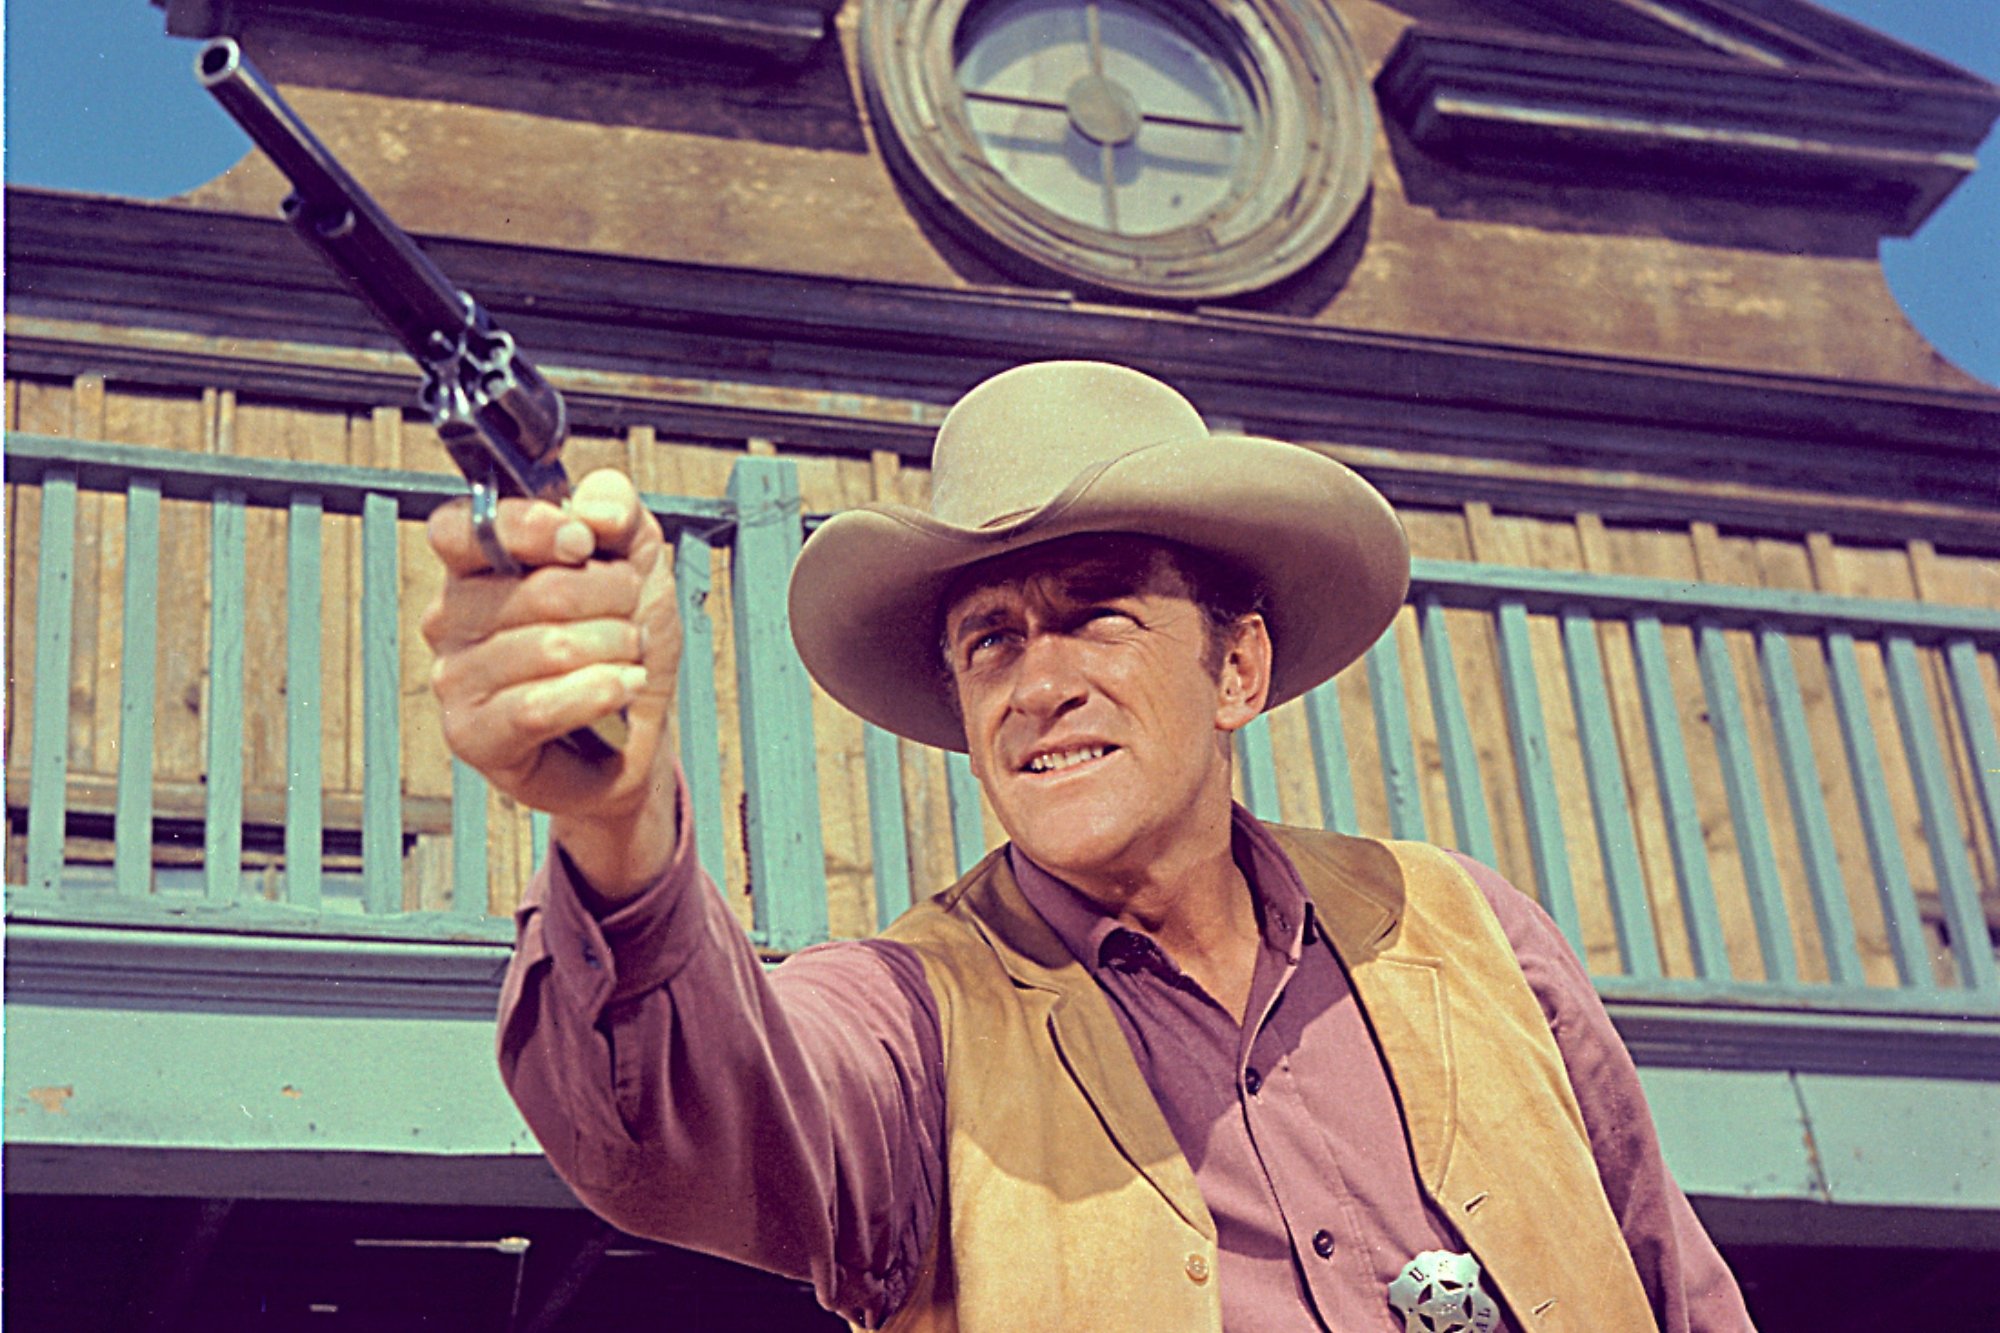 'Gunsmoke' actor James Arness as U. S. Marshal Matt Dillon pointing his gun, ready to shoot. He's wearing a tan vest and salmon-colored shirt underneath and a Western hat.